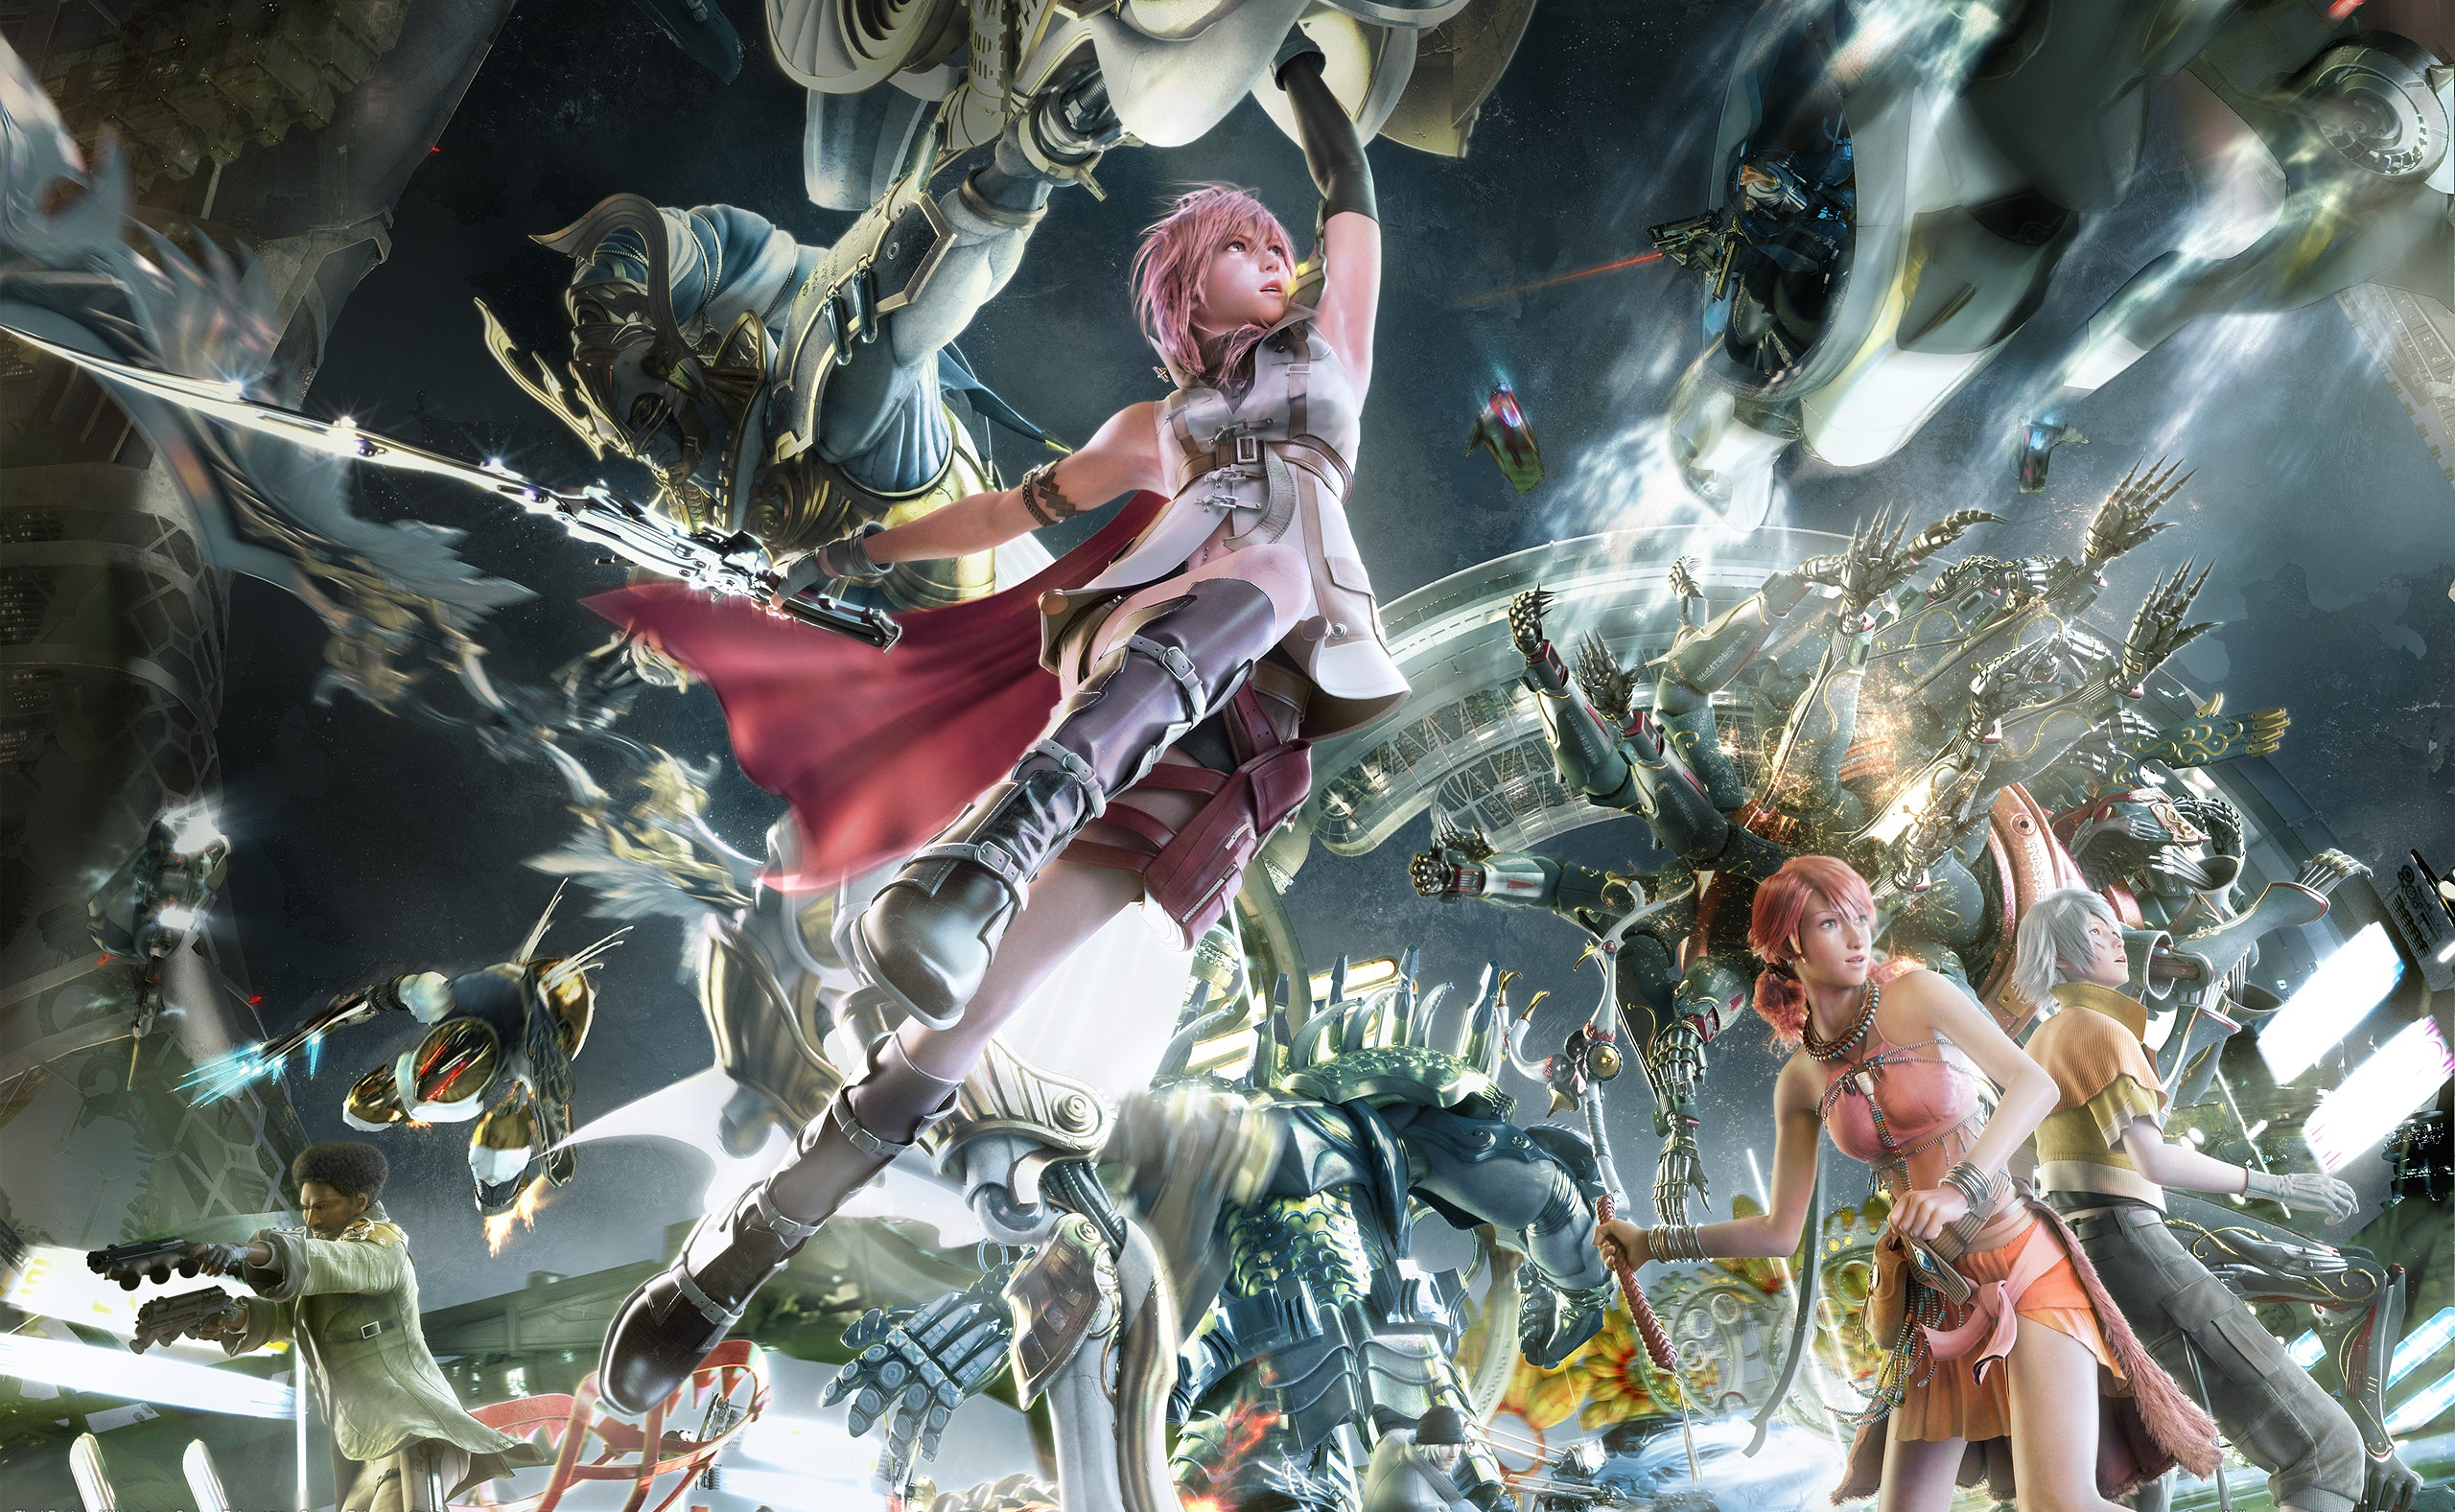 final fantasy xiii wallpaper,cg artwork,fictional character,action adventure game,games,pc game